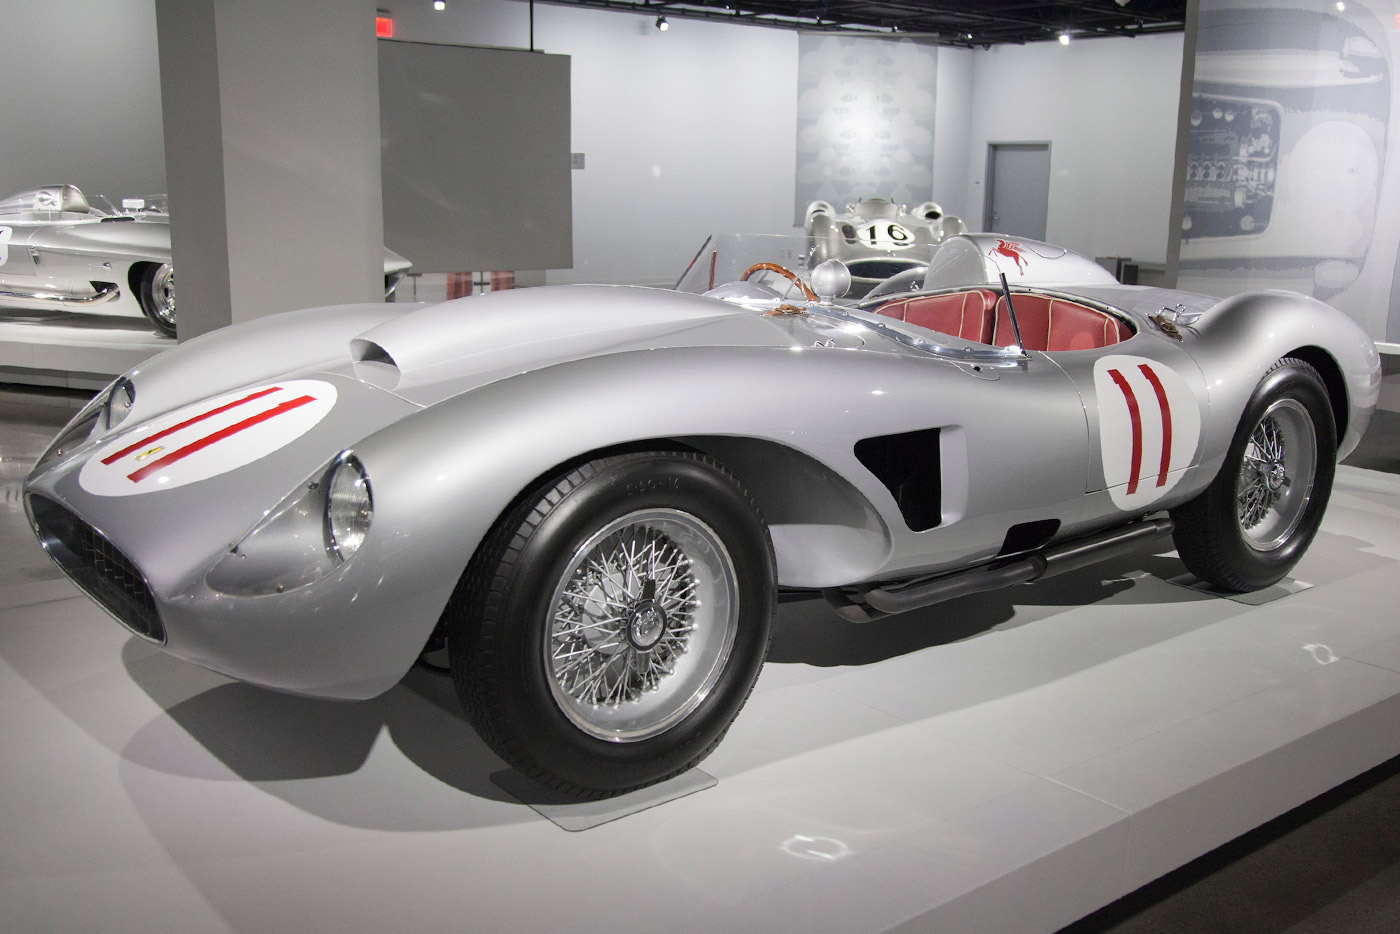 1957 Ferrari 625/250 Testa Rossa: Also on display in the Precious Metals exhibit, this stunning car is on loan from Bruce Meyer, one of the PAM&#x2019;s board members